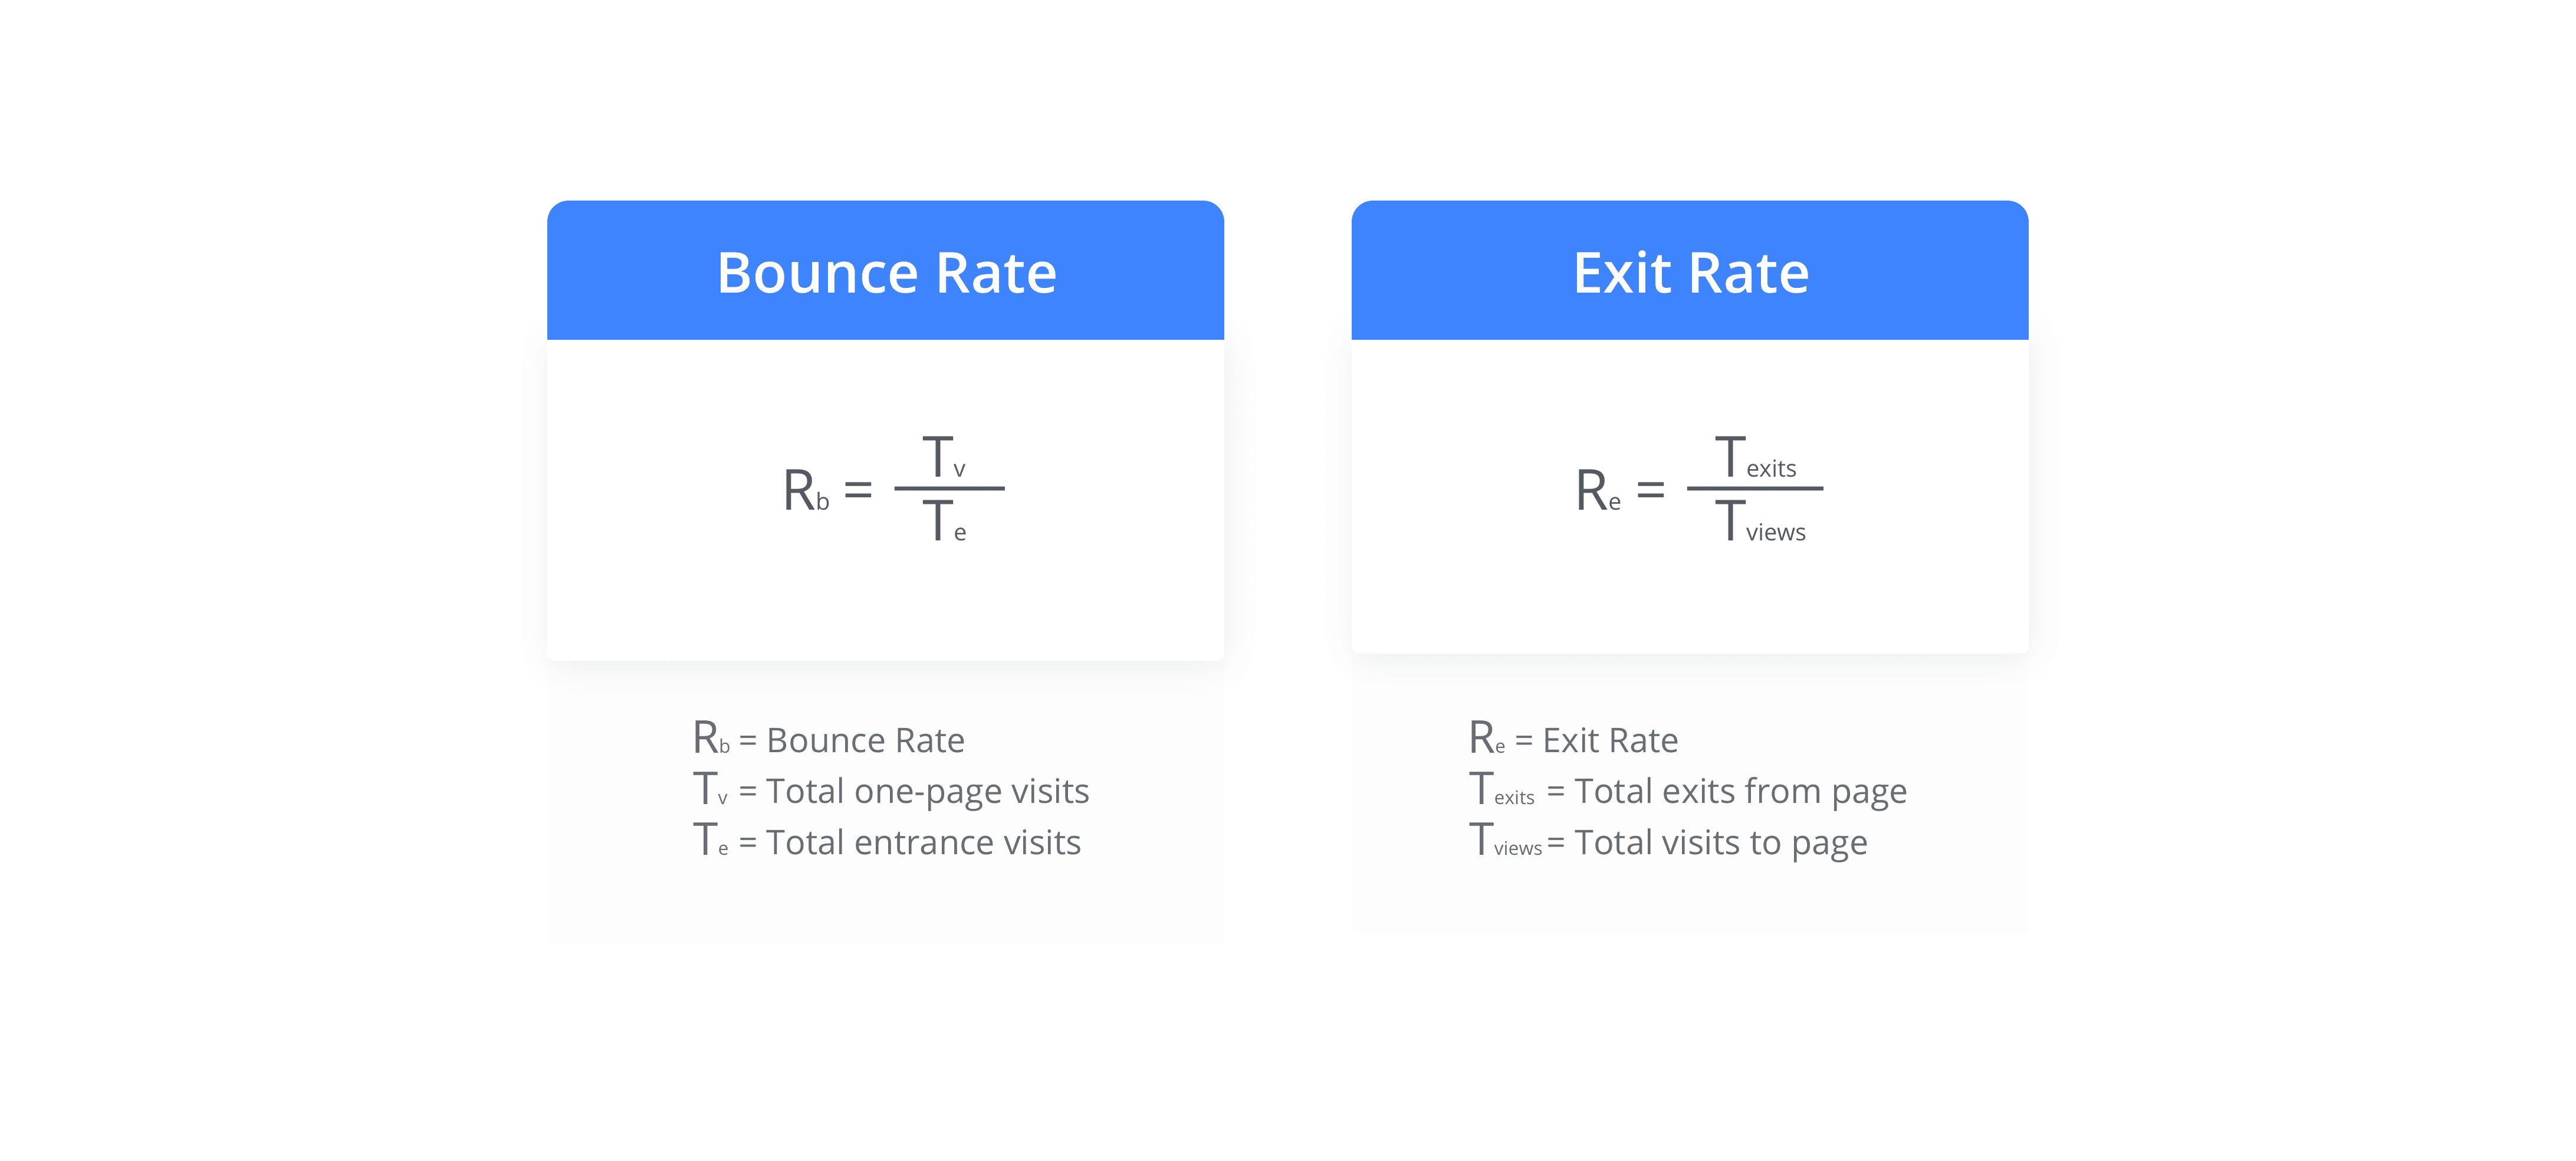 Bounce rate and Exit rate formulas